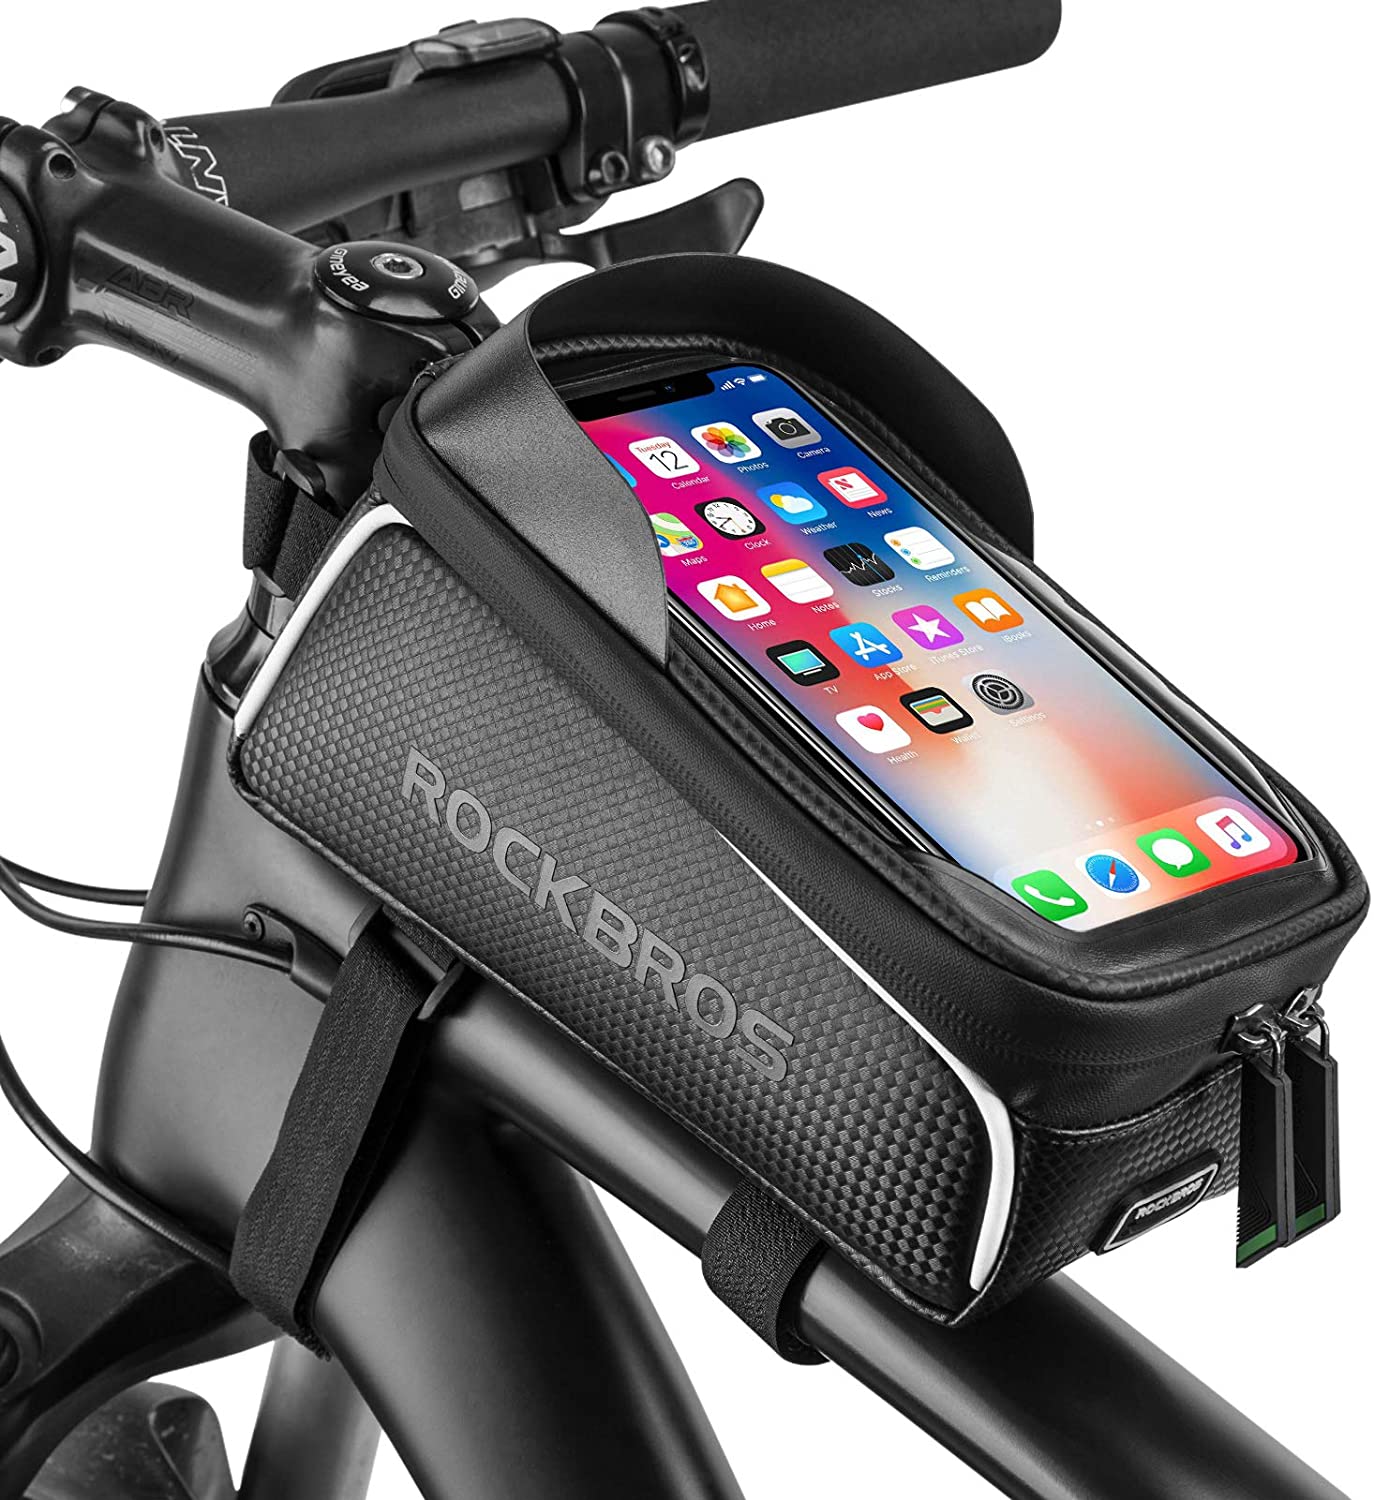 ROCKBROS Waterproof Top Tube Bag 1.5L for Phones Under 6.5 Inches